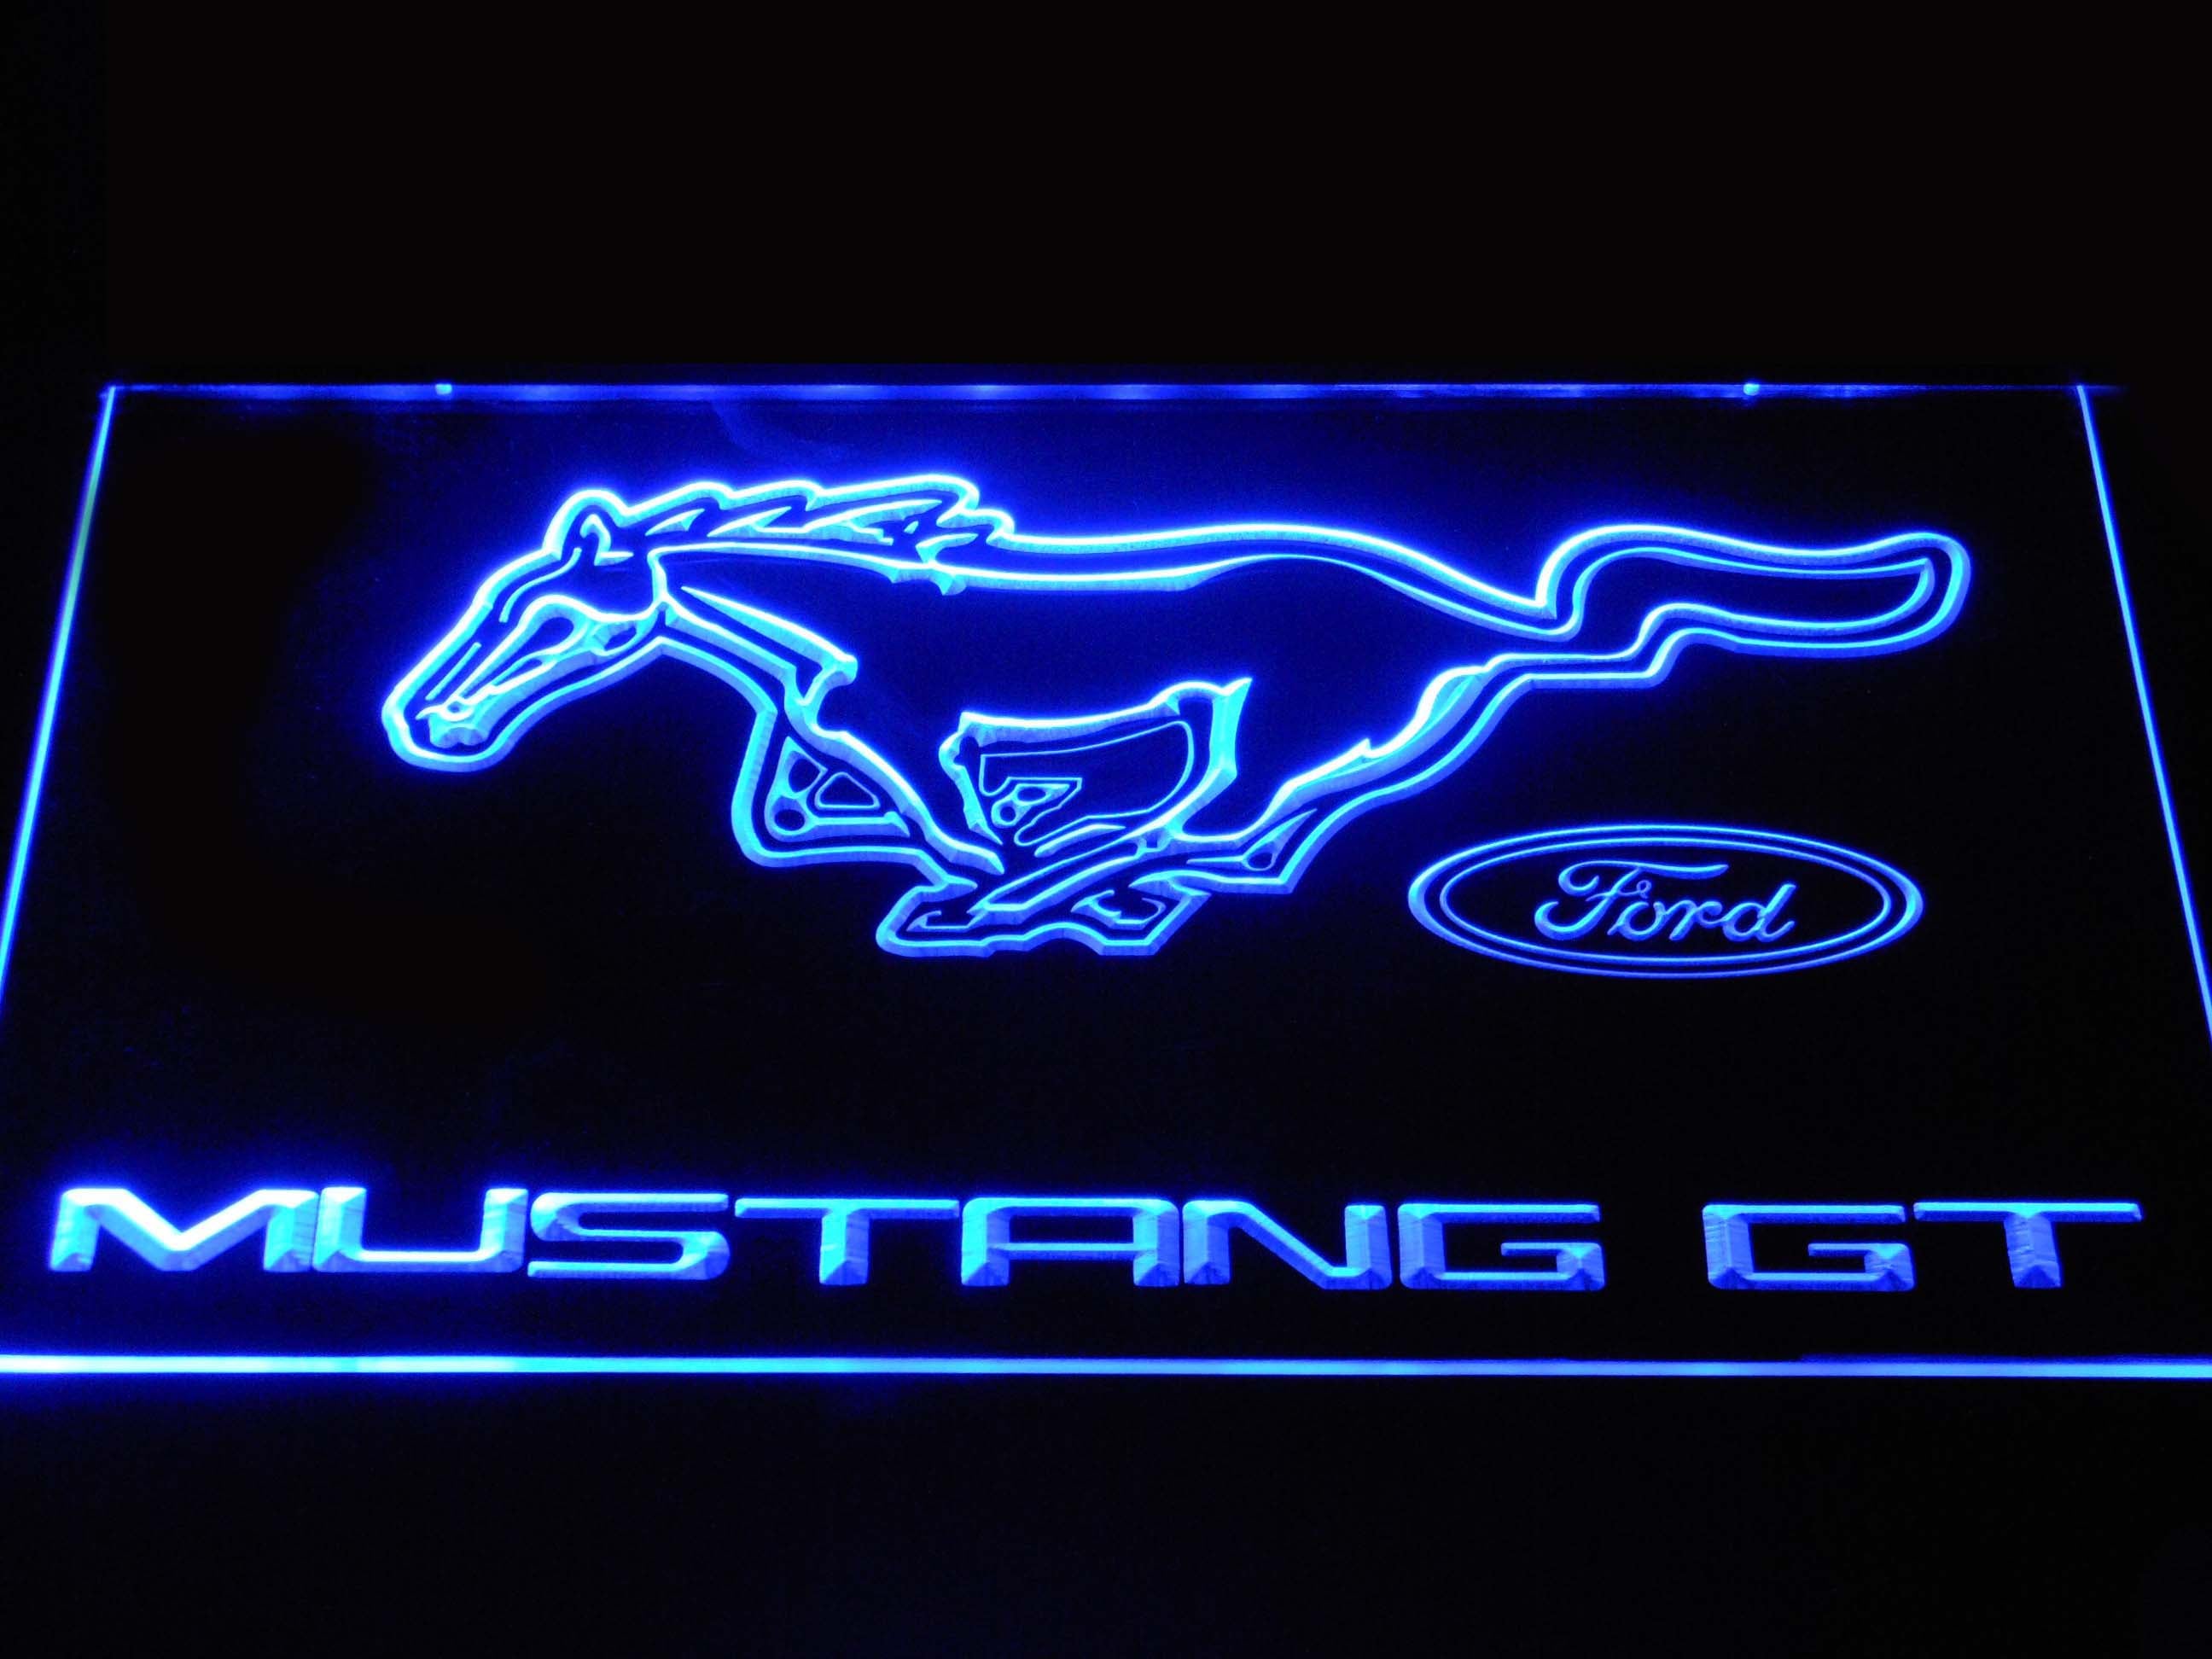 Ford Mustang GT LED Neon Sign   Neon Light LED Sign